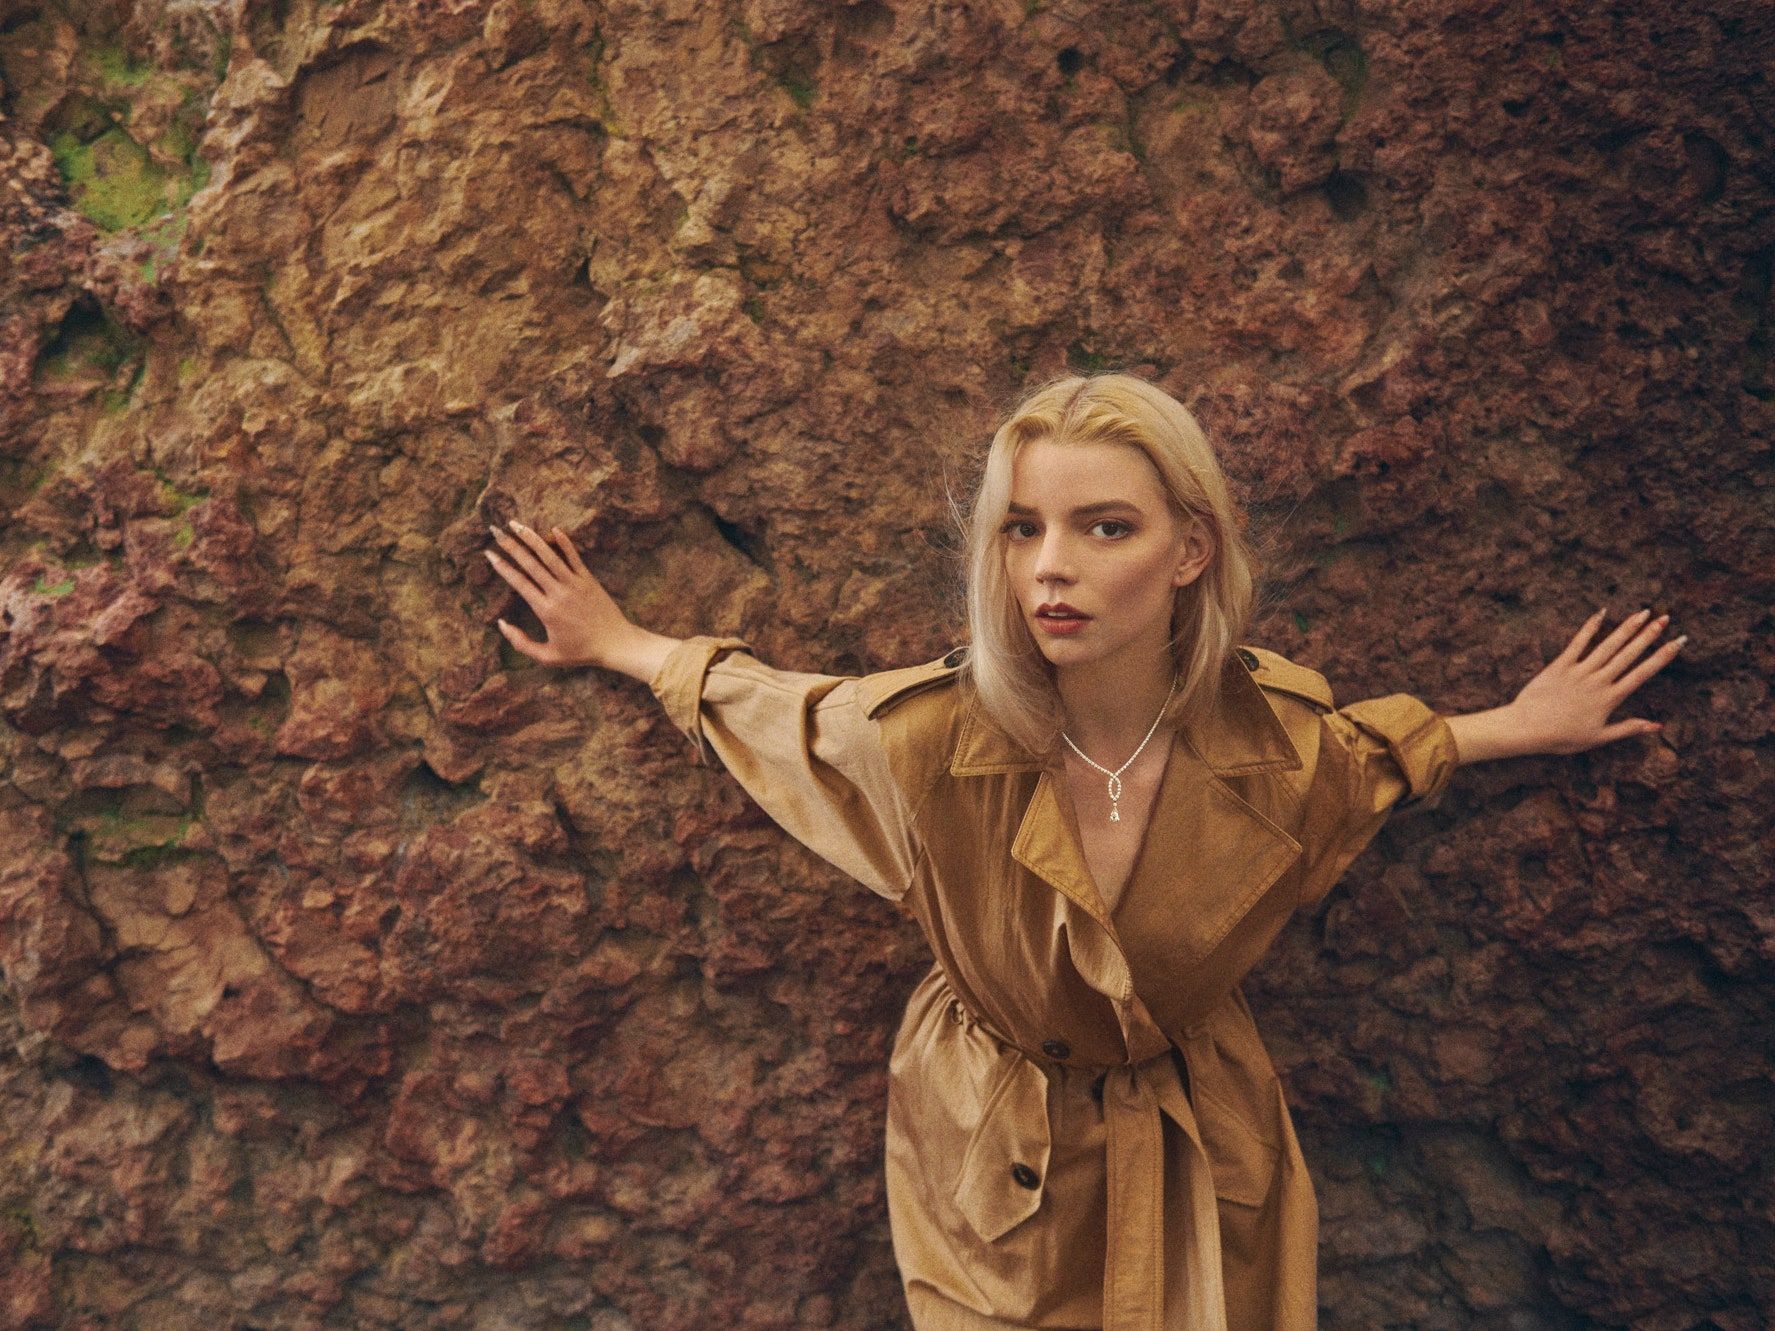 Anya Taylor Joy Interview: The 'Queen's Gambit' Star On Life Before And After A Smash